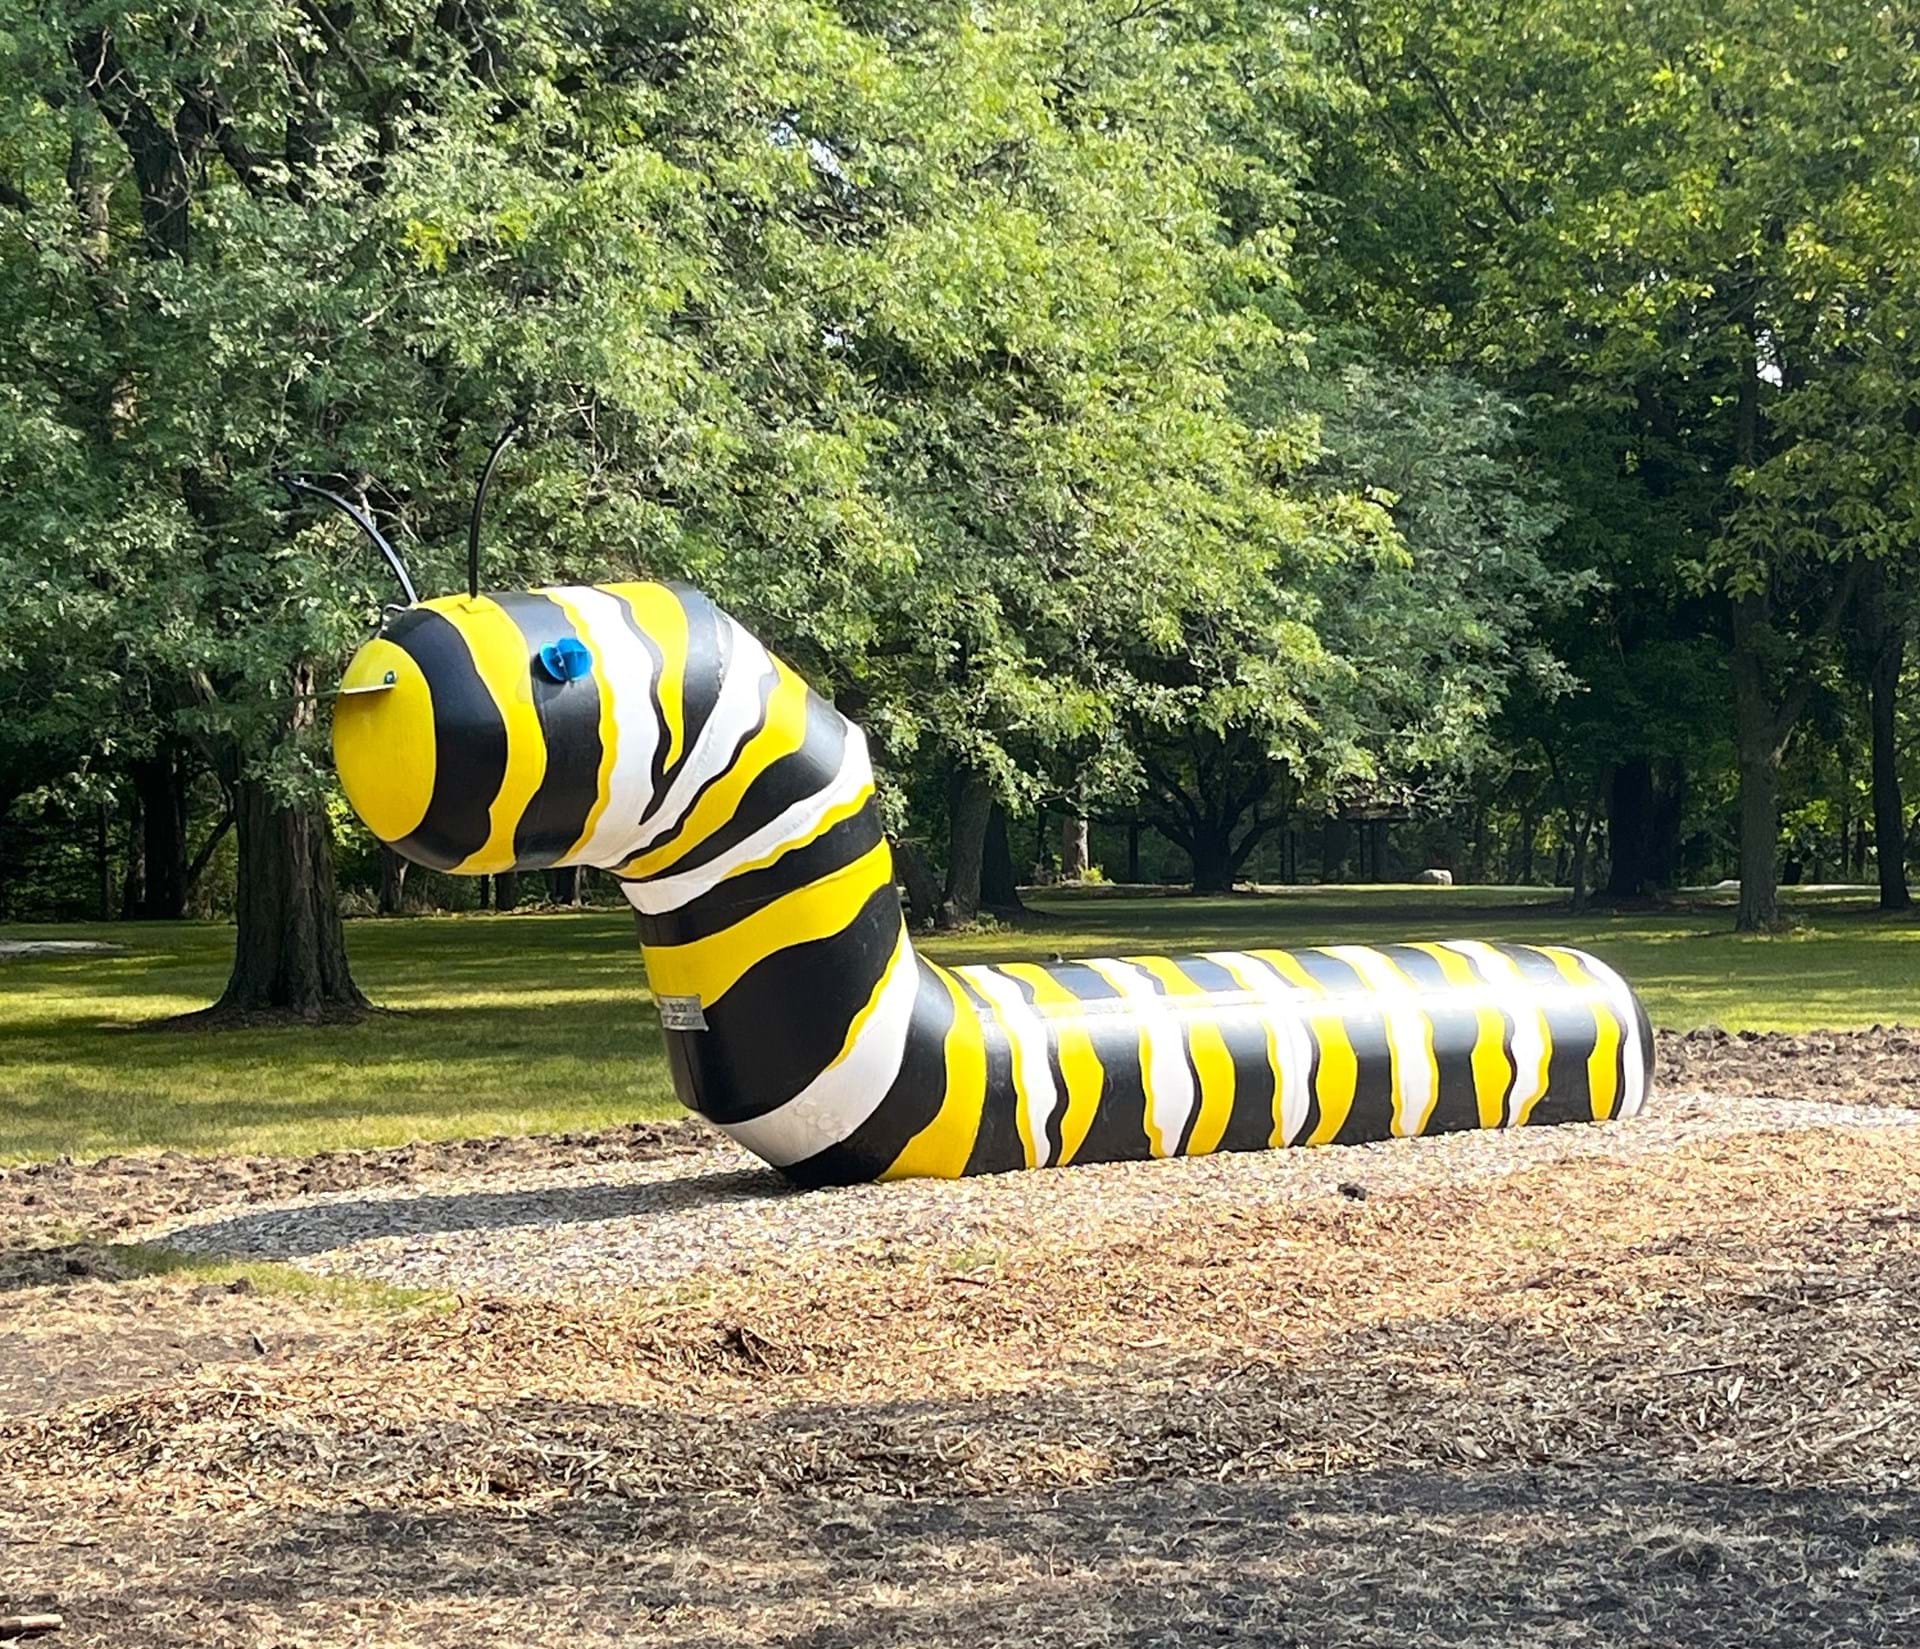 This enormous caterpillar is one of several playable art pieces in the Children's Forest.